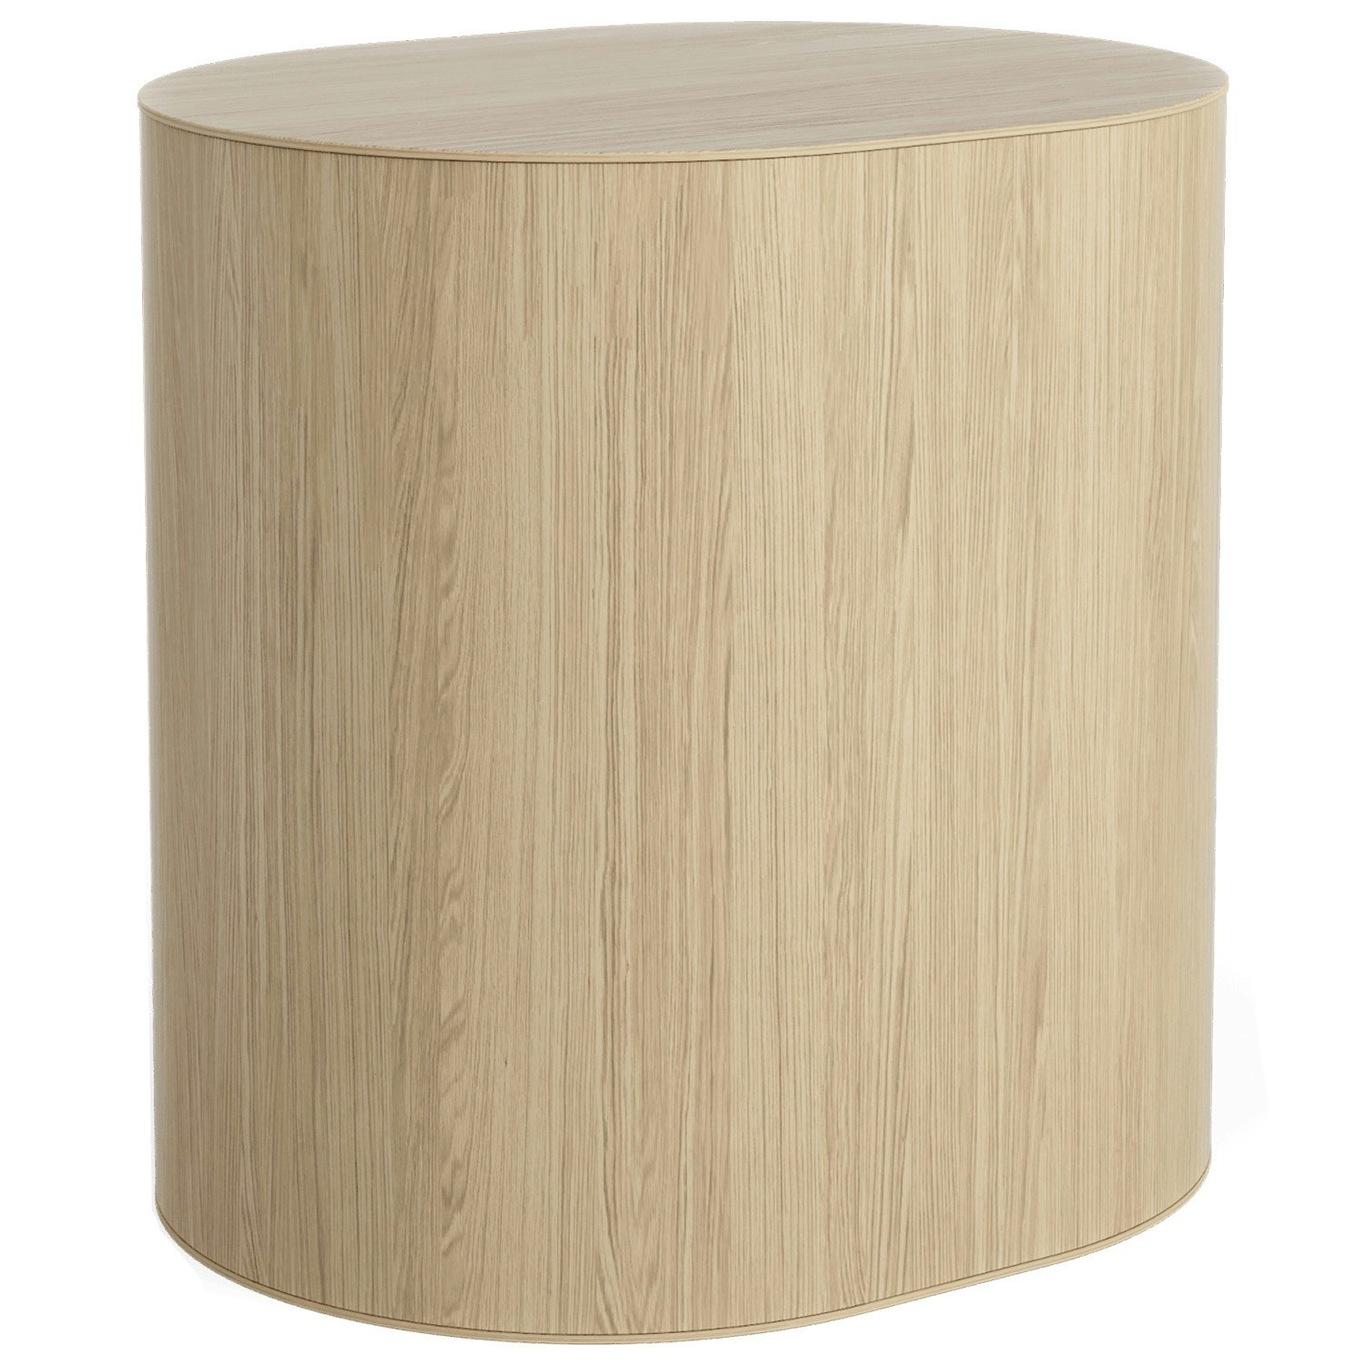 Log Side Table With Storage, Natural Oak